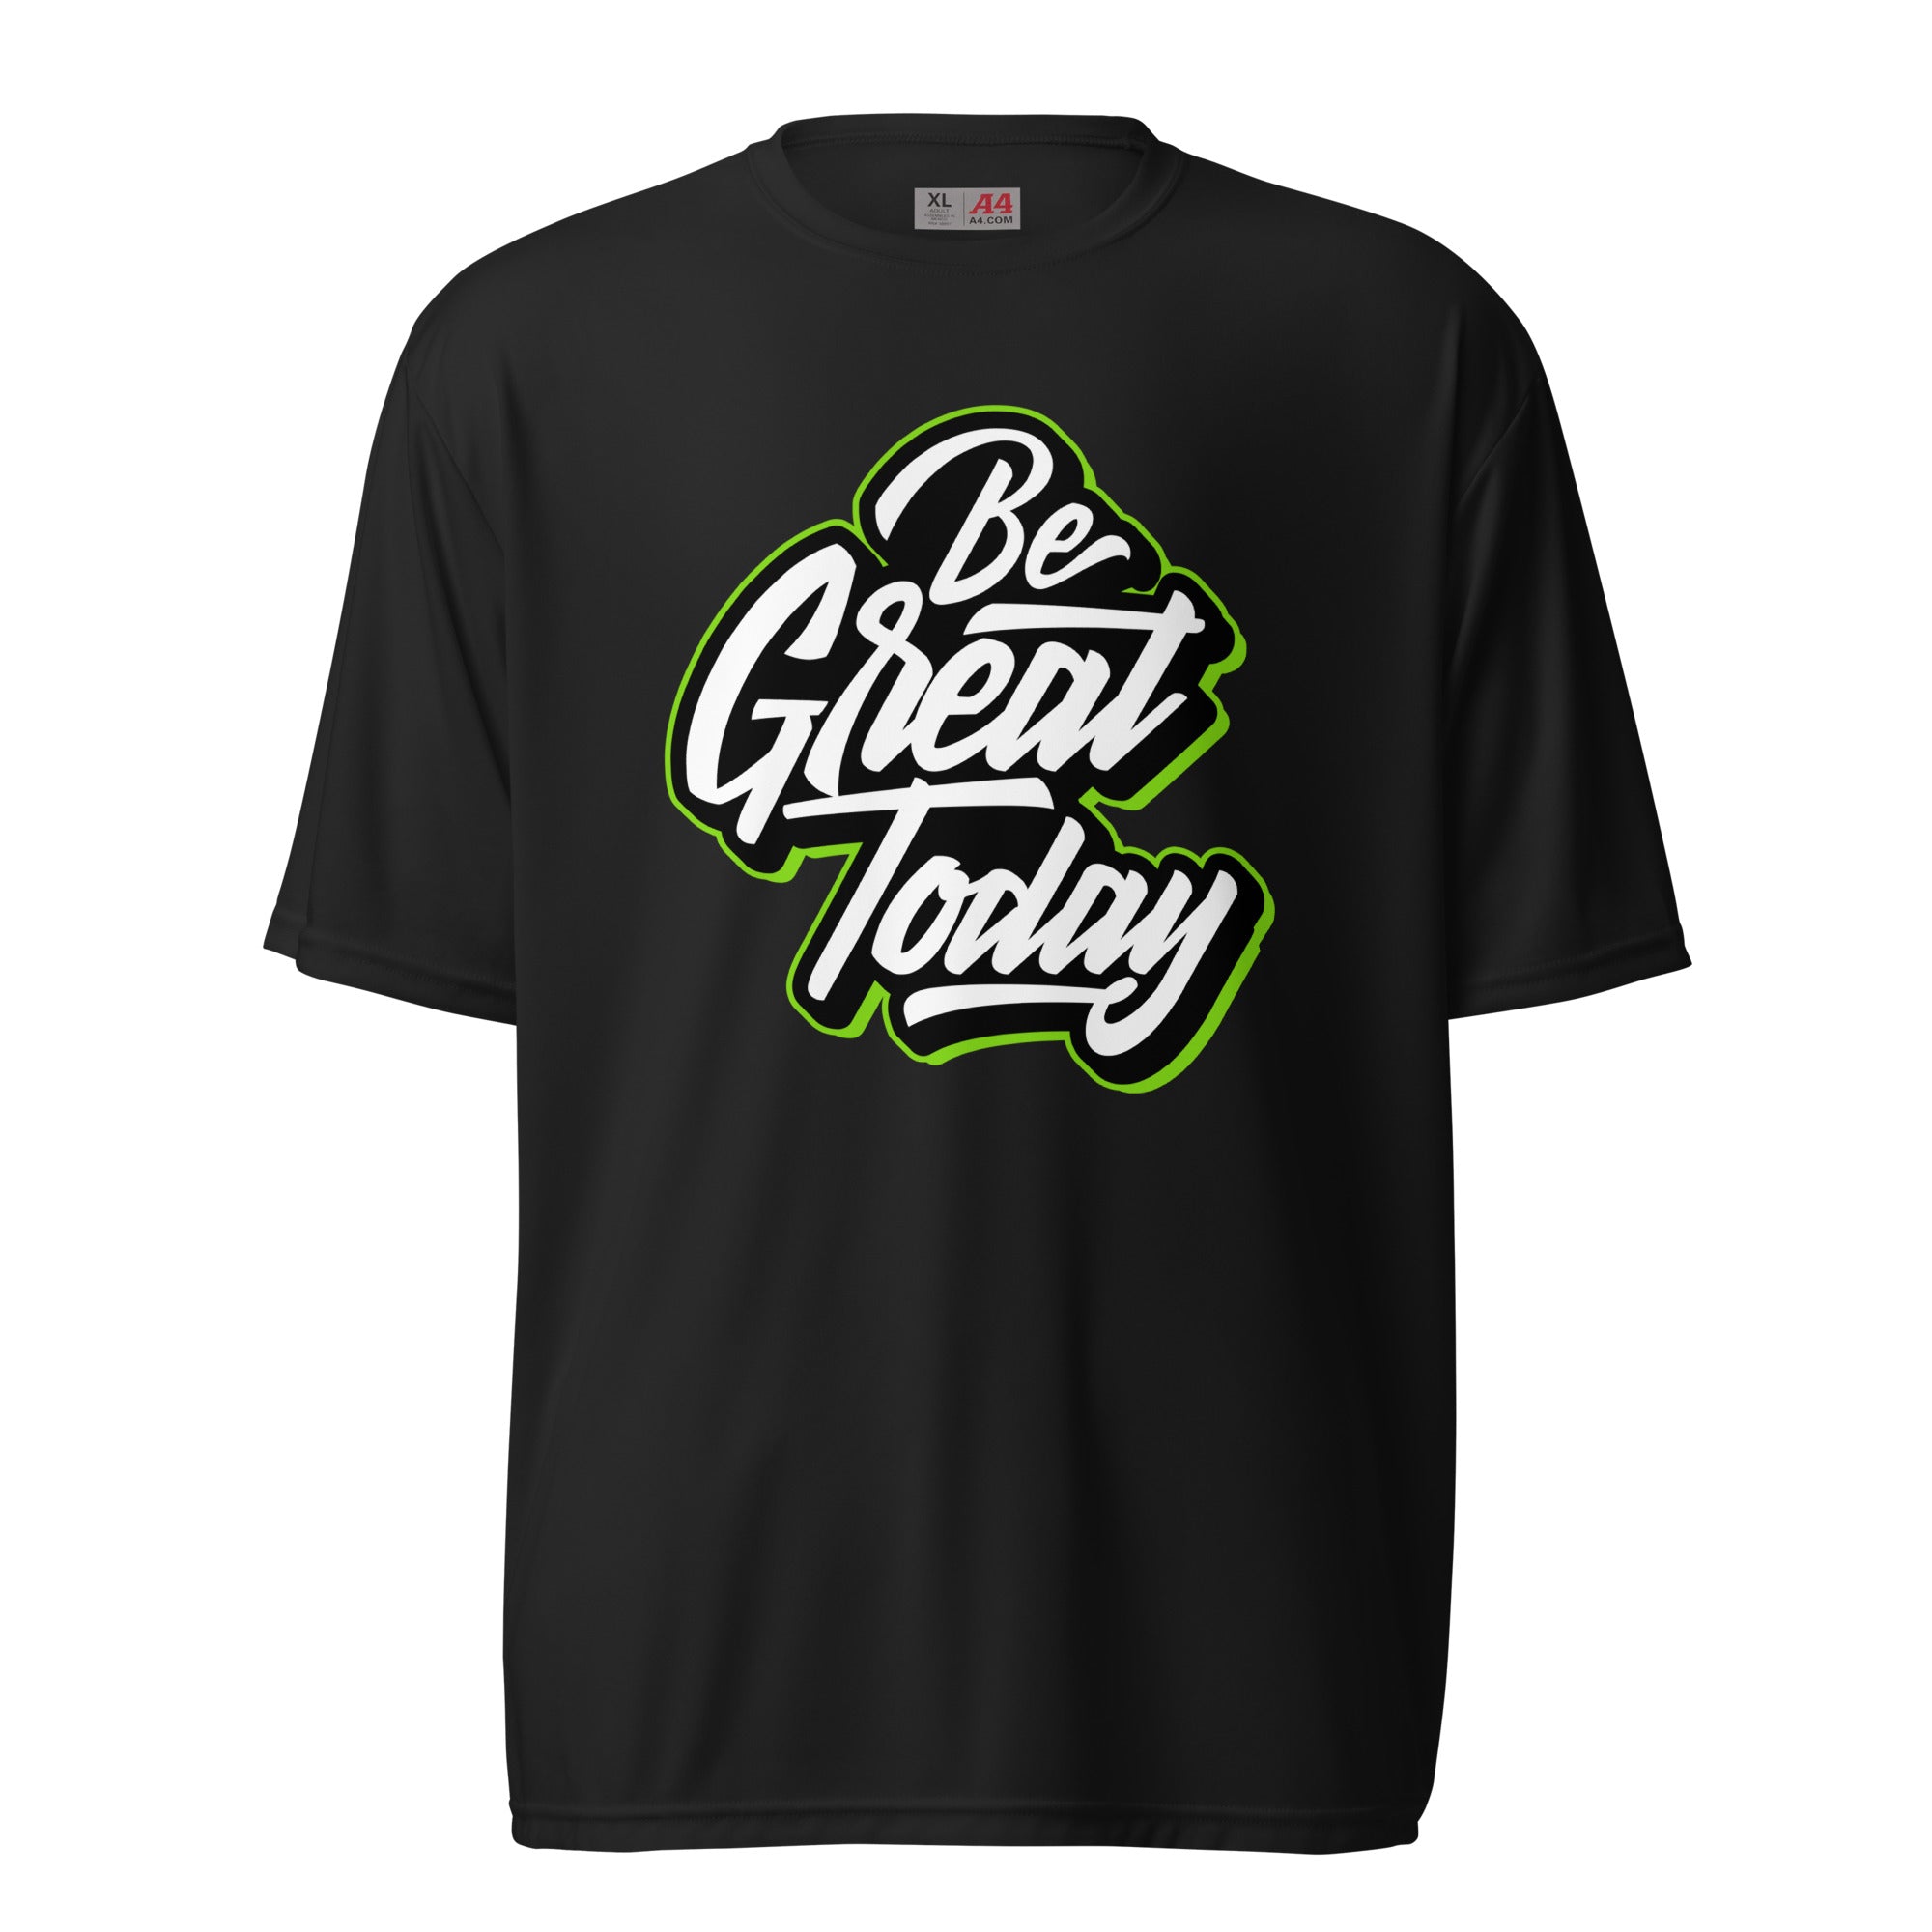 Be Great Today Unisex performance crew neck t-shirt